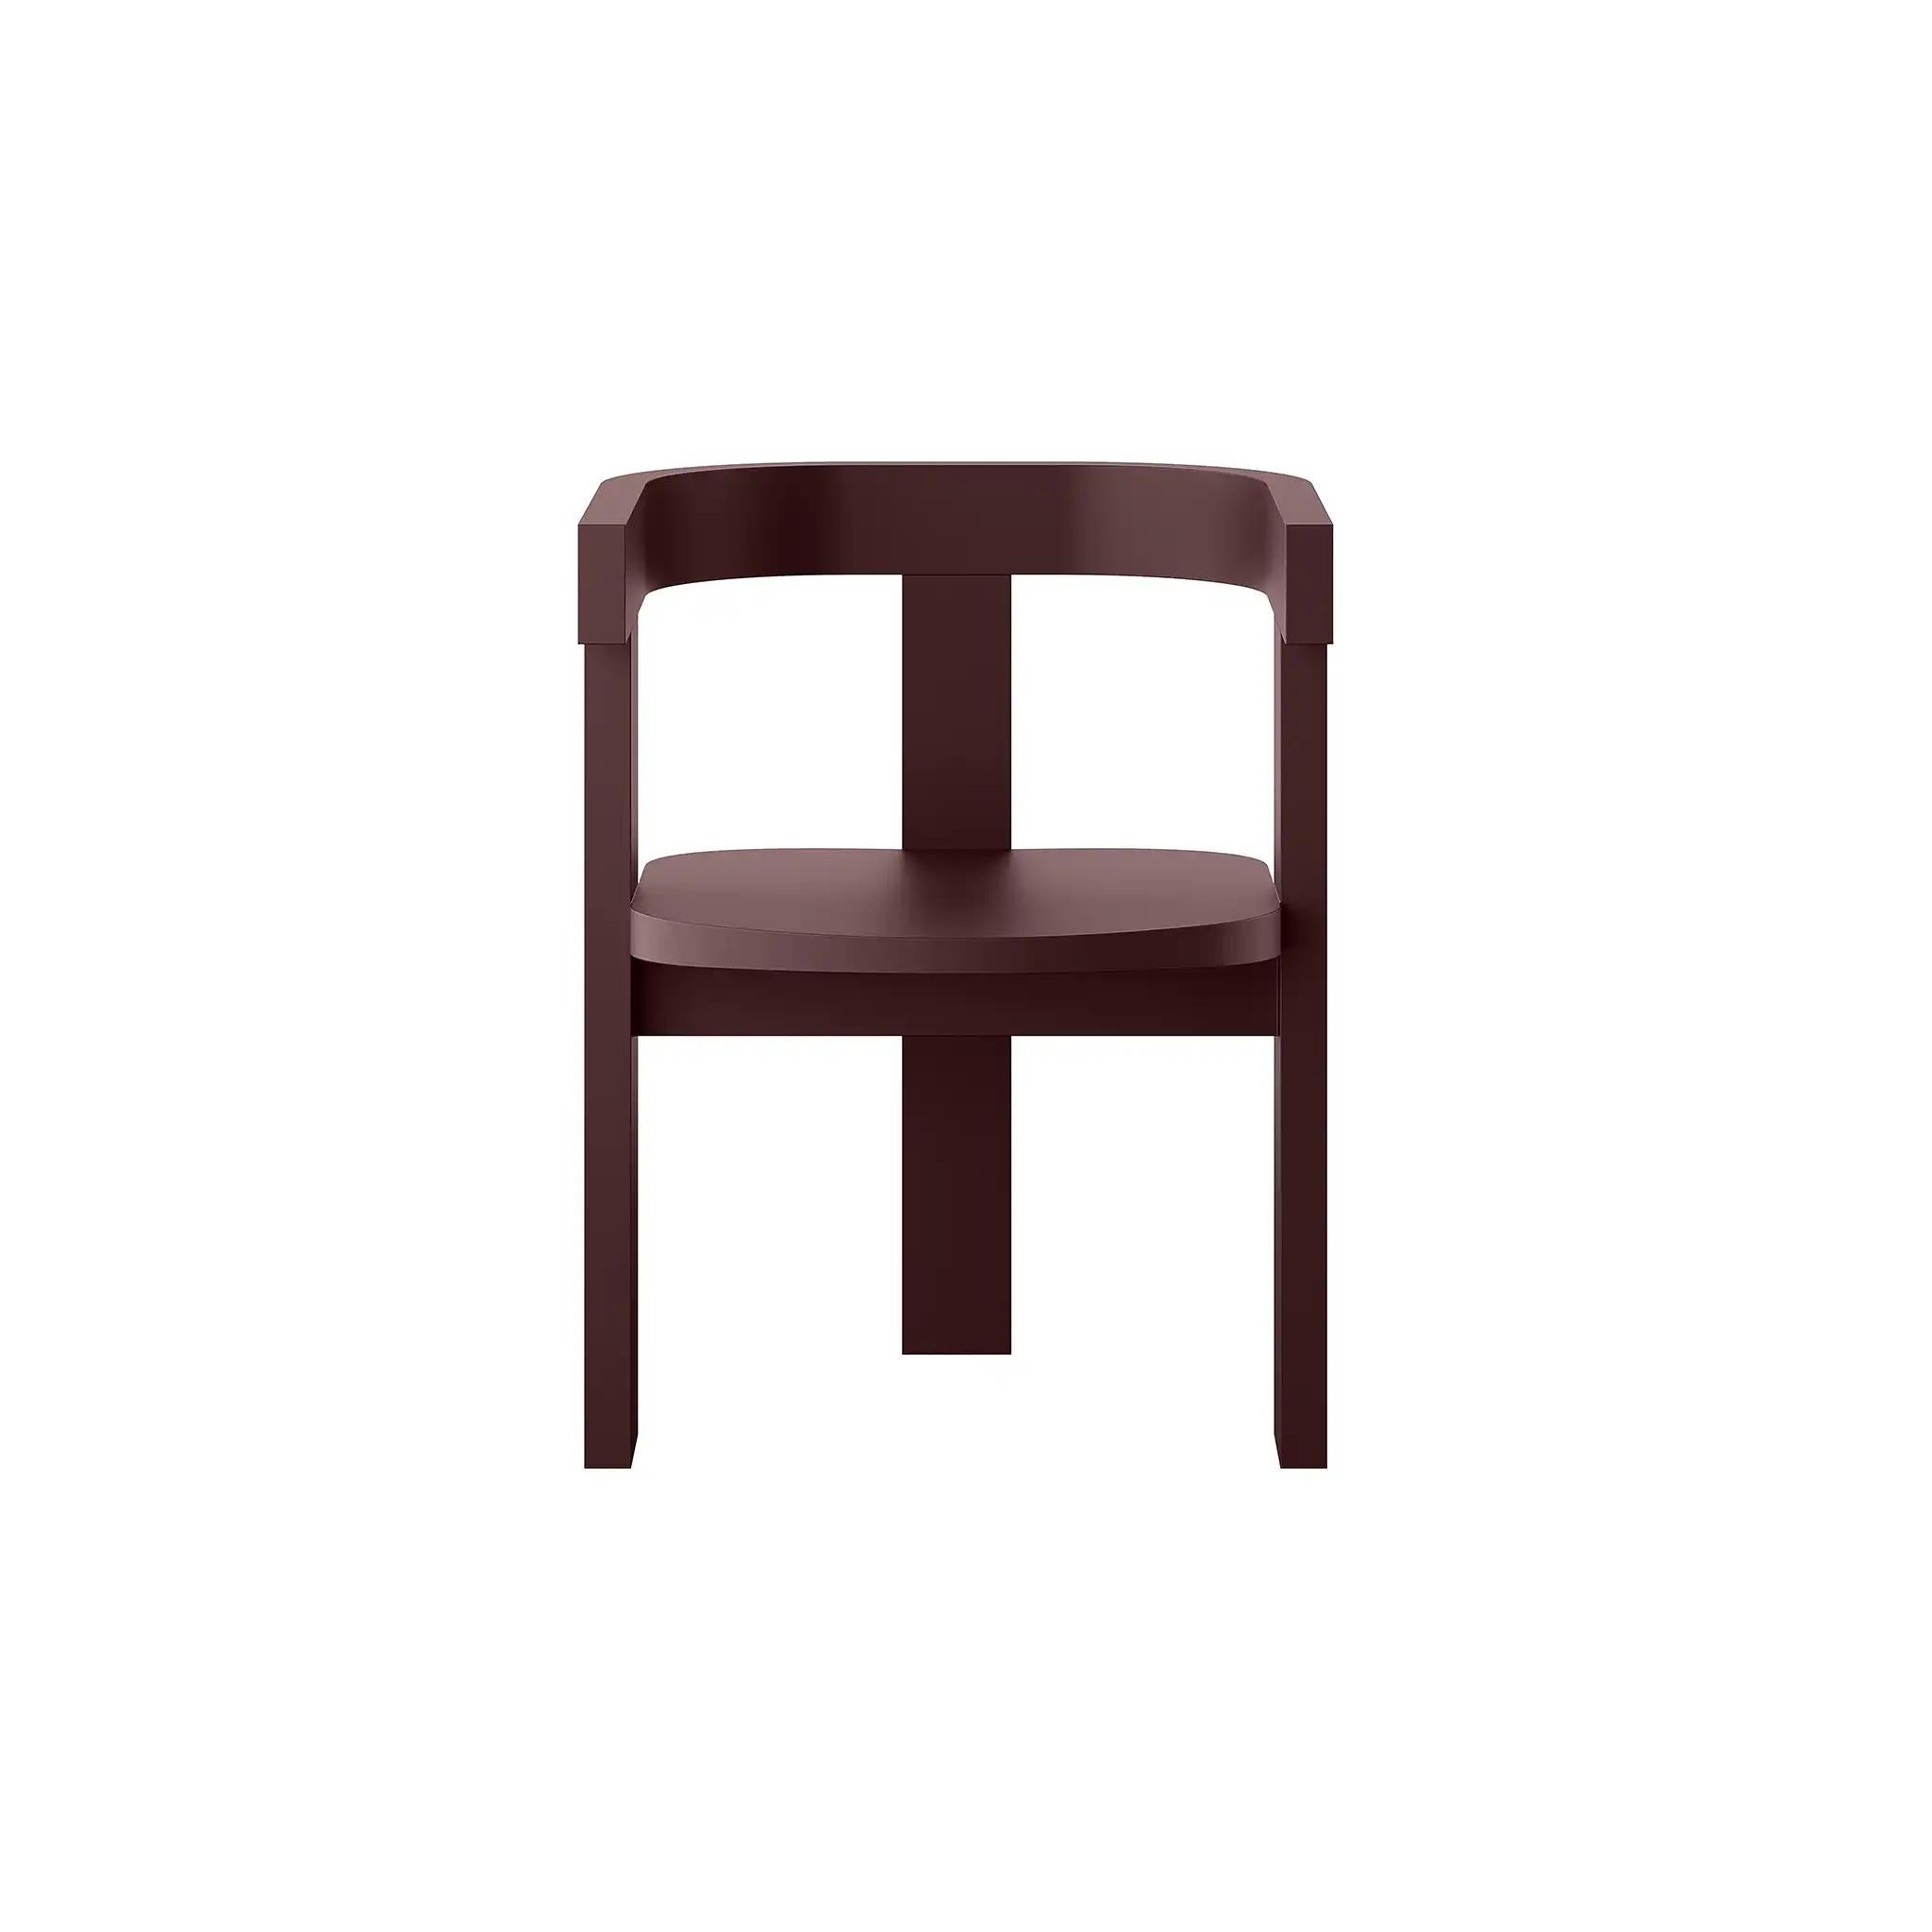 Introducing our Contemporary Rouge Noire Matte Lacquer Wood Dining Chair, a striking addition to elevate your dining experience.
Crafted with precision and finished in a bold matte lacquer, this chair exudes modern sophistication.
The distinctive